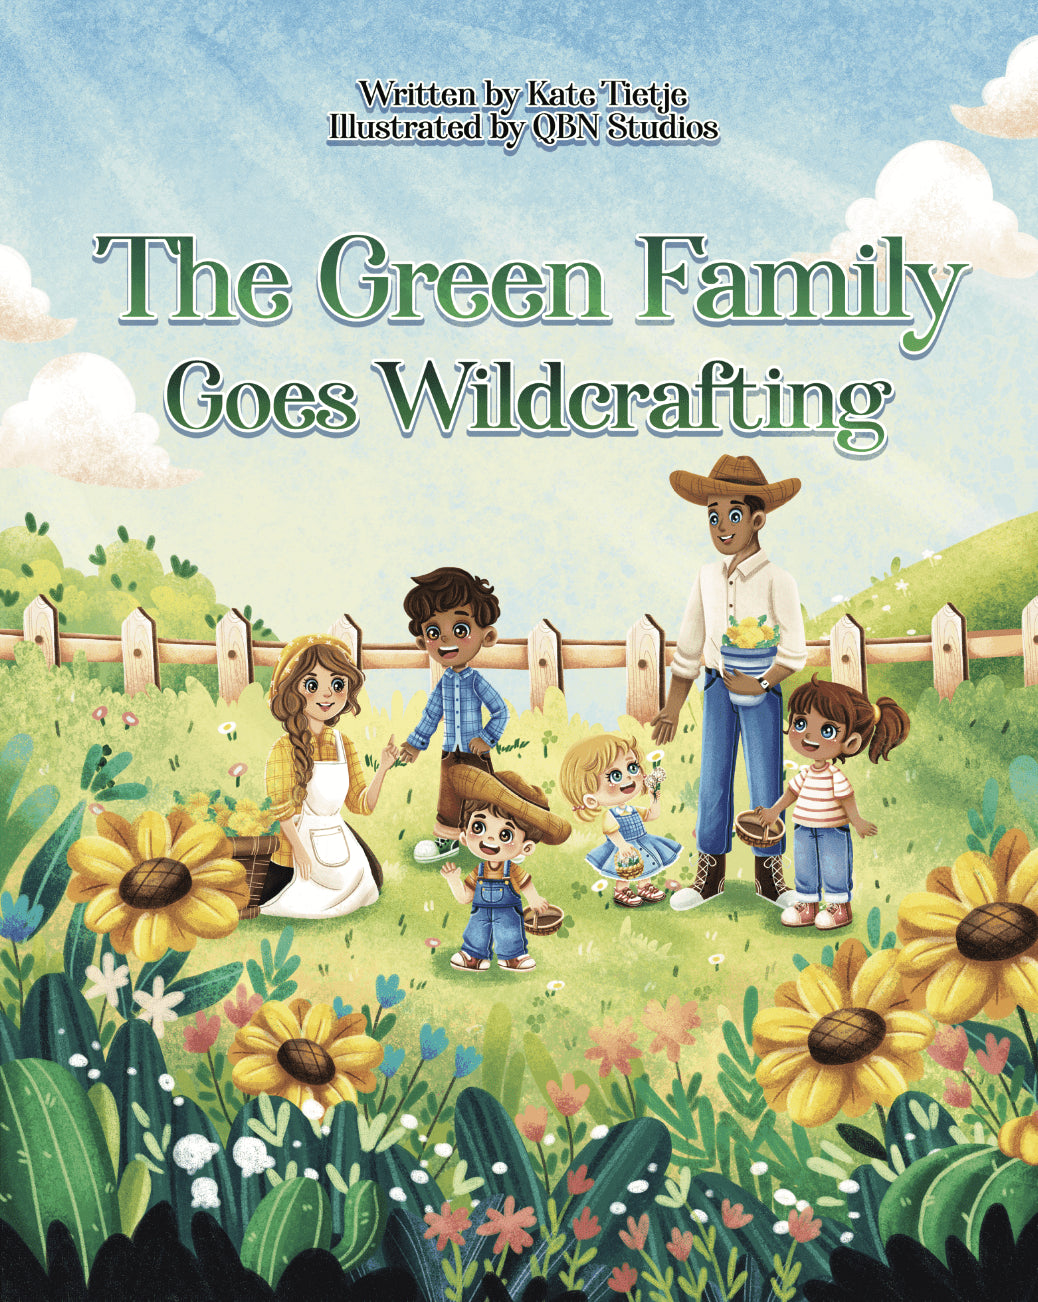 The Green Family Goes Wildcrafting